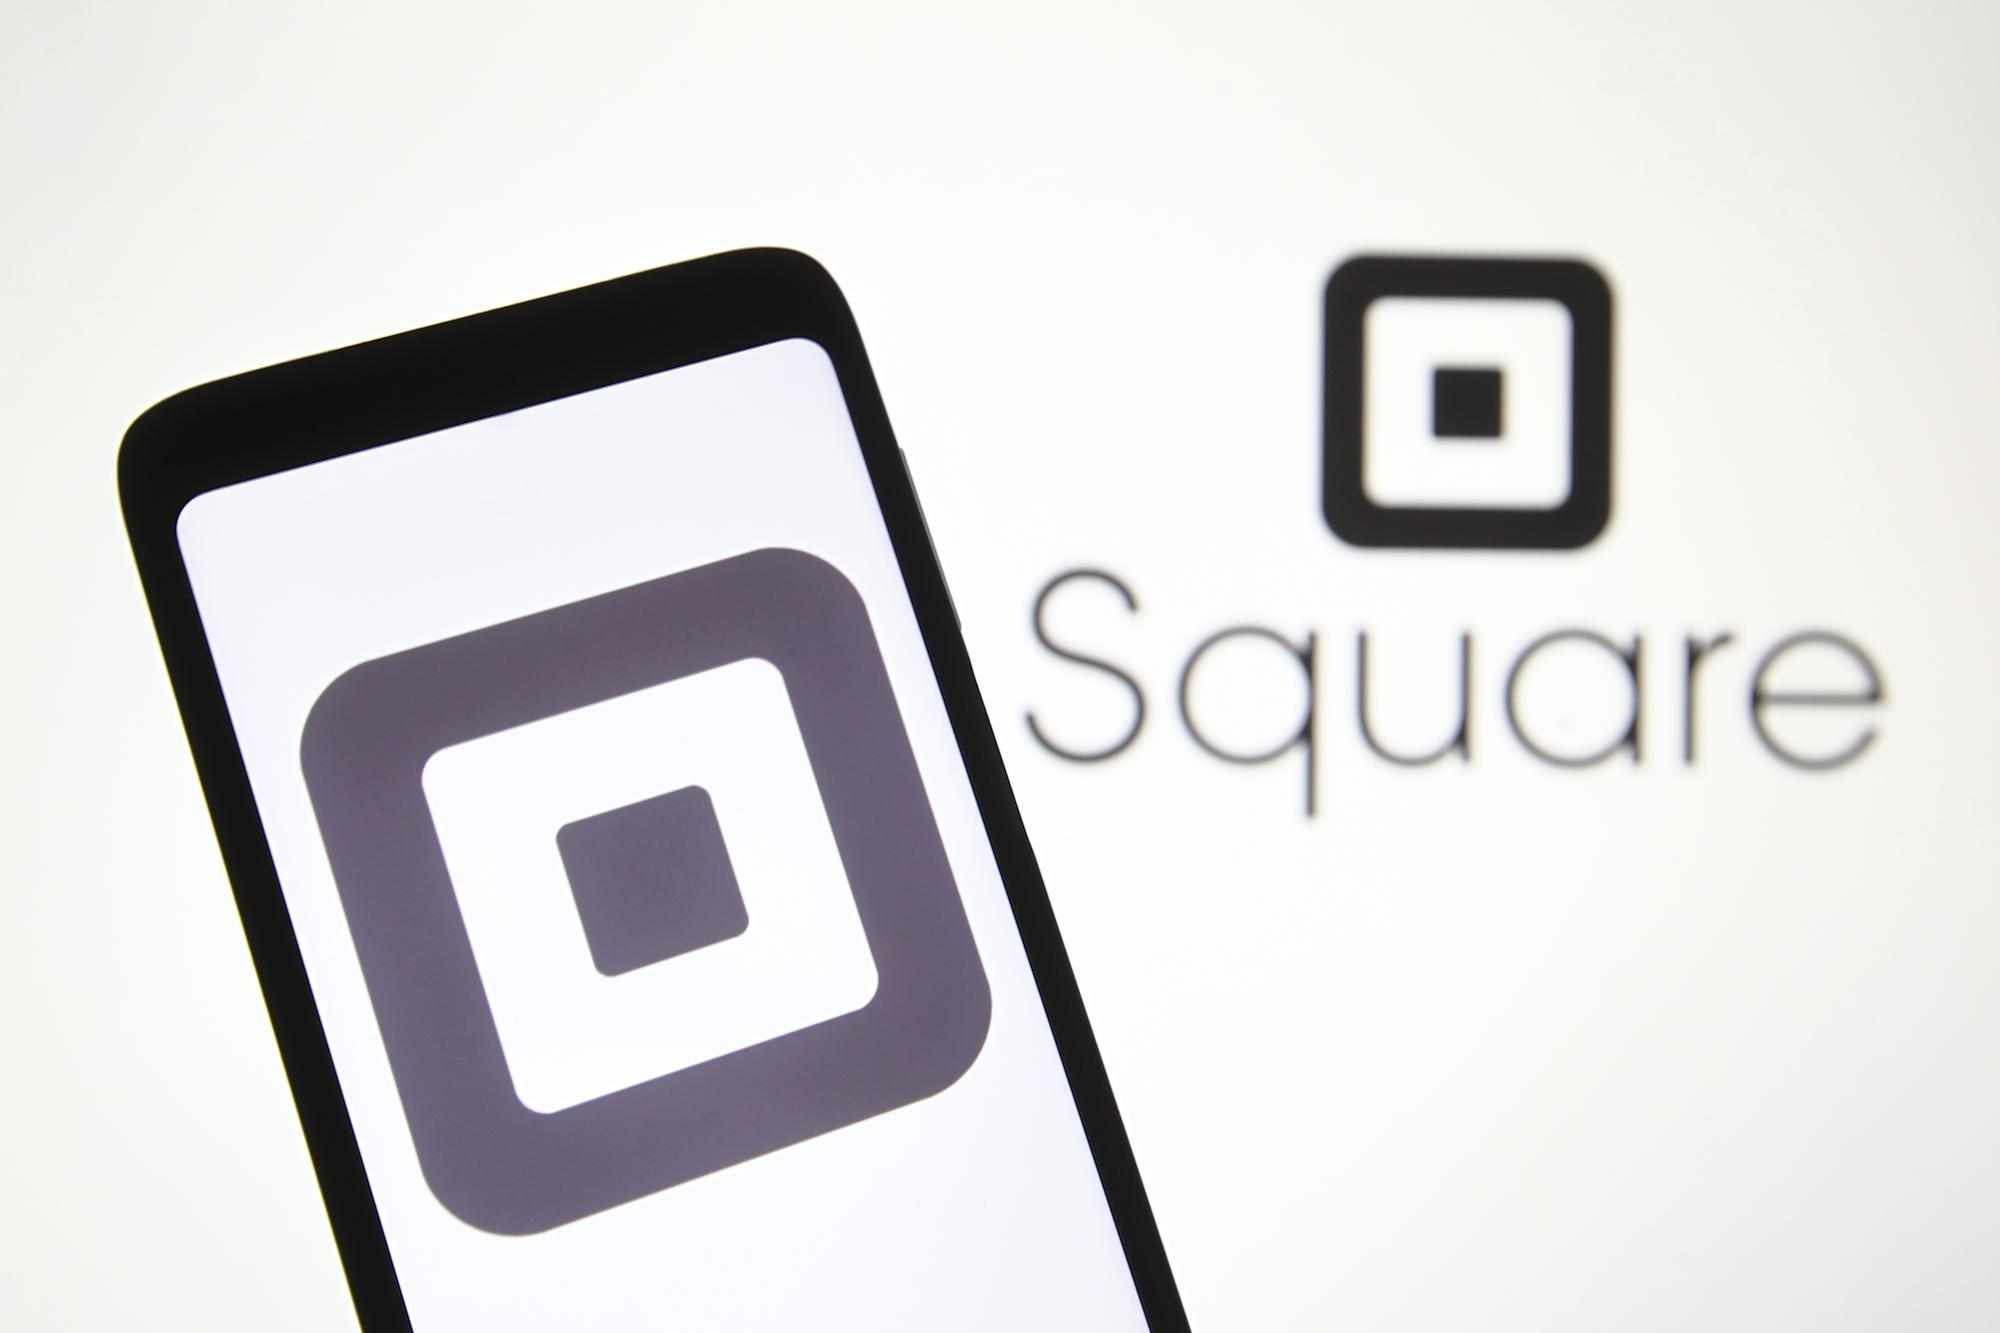 square earnings transactions economic recovery